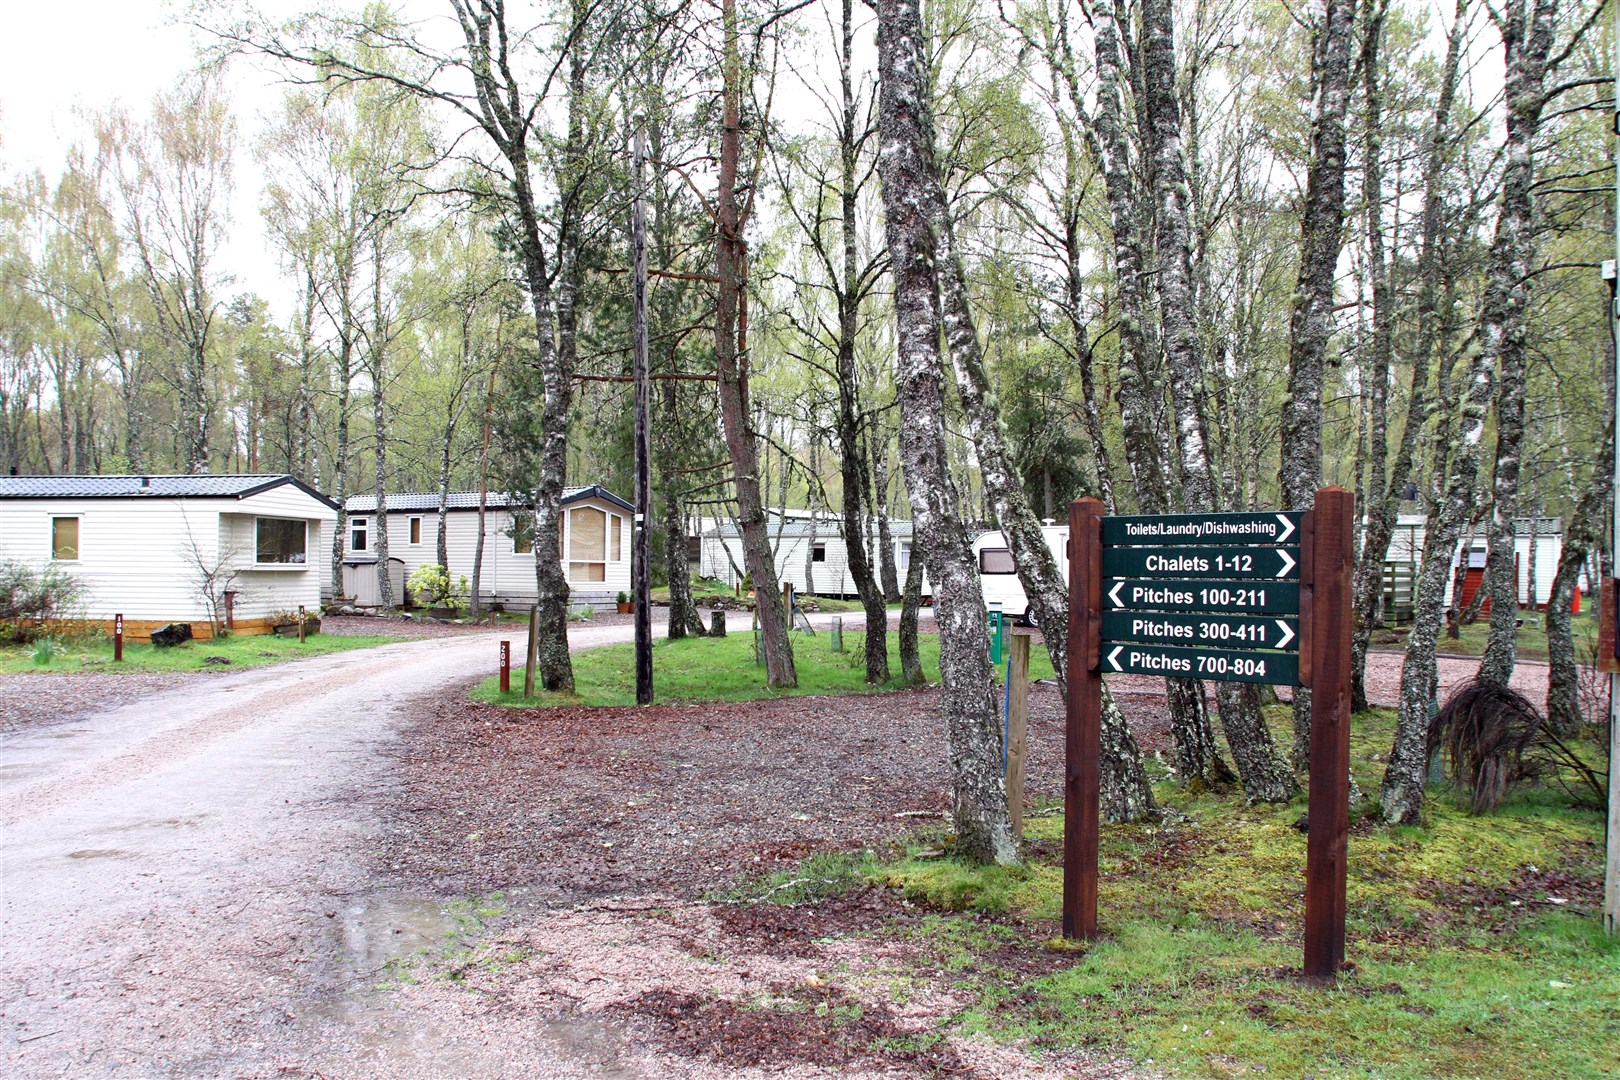 More caravan pitches and two amenity blocks are recommended for approval at Dalraddy Holiday Park by Aviemore.